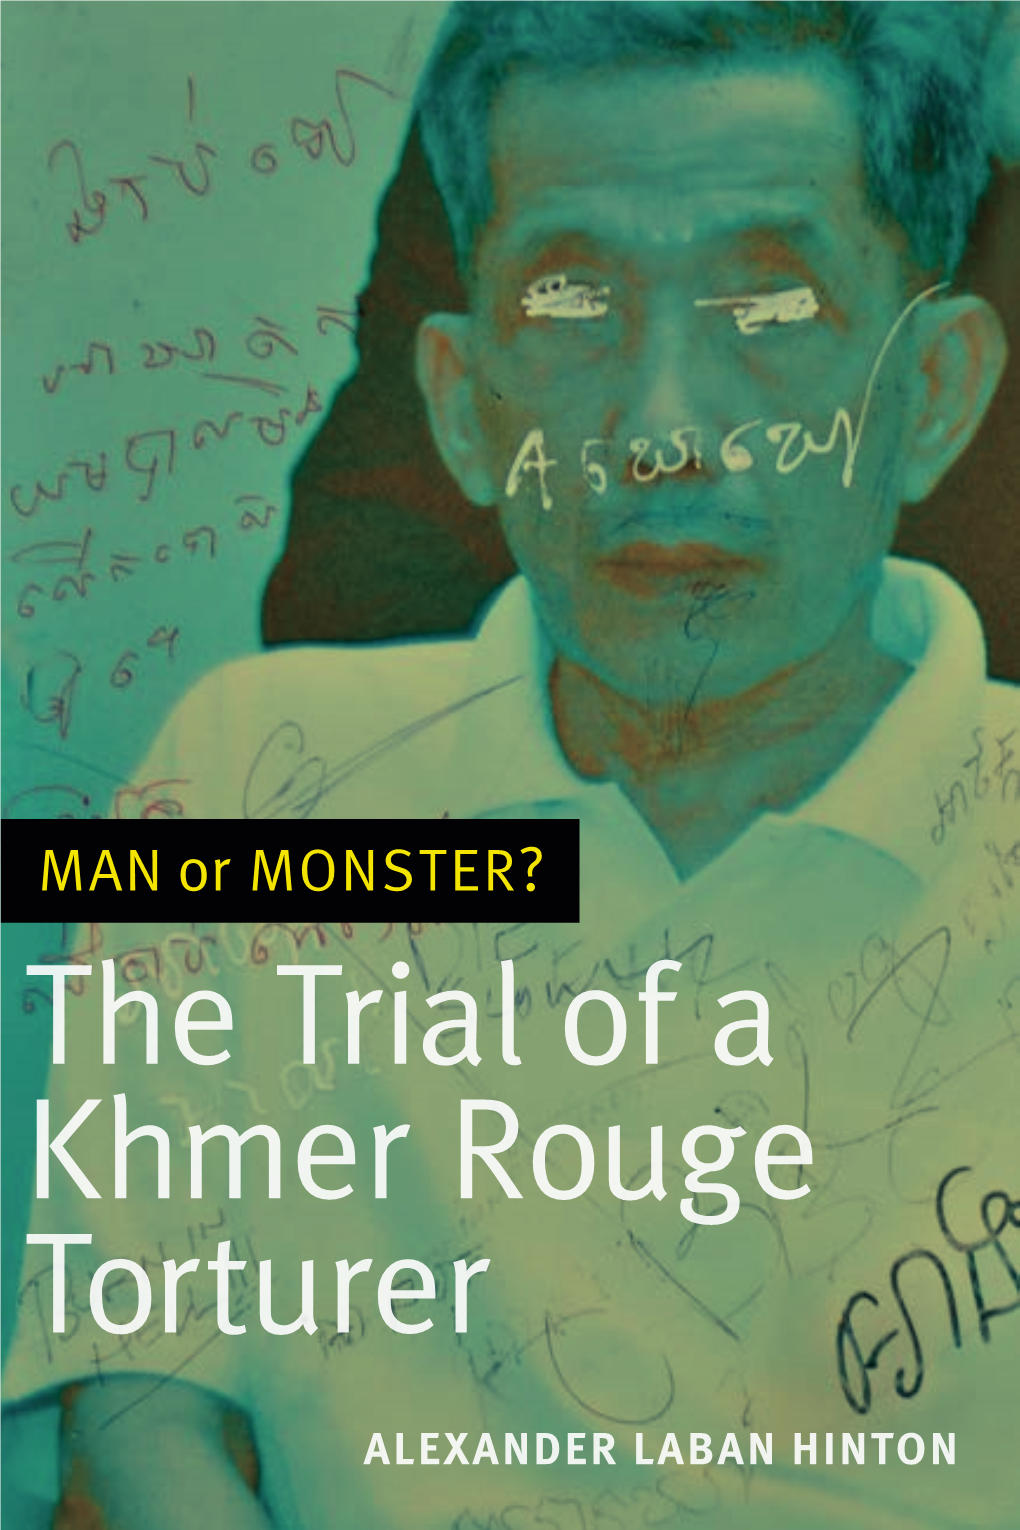 The Trial of a Khmer Rouge Torturer